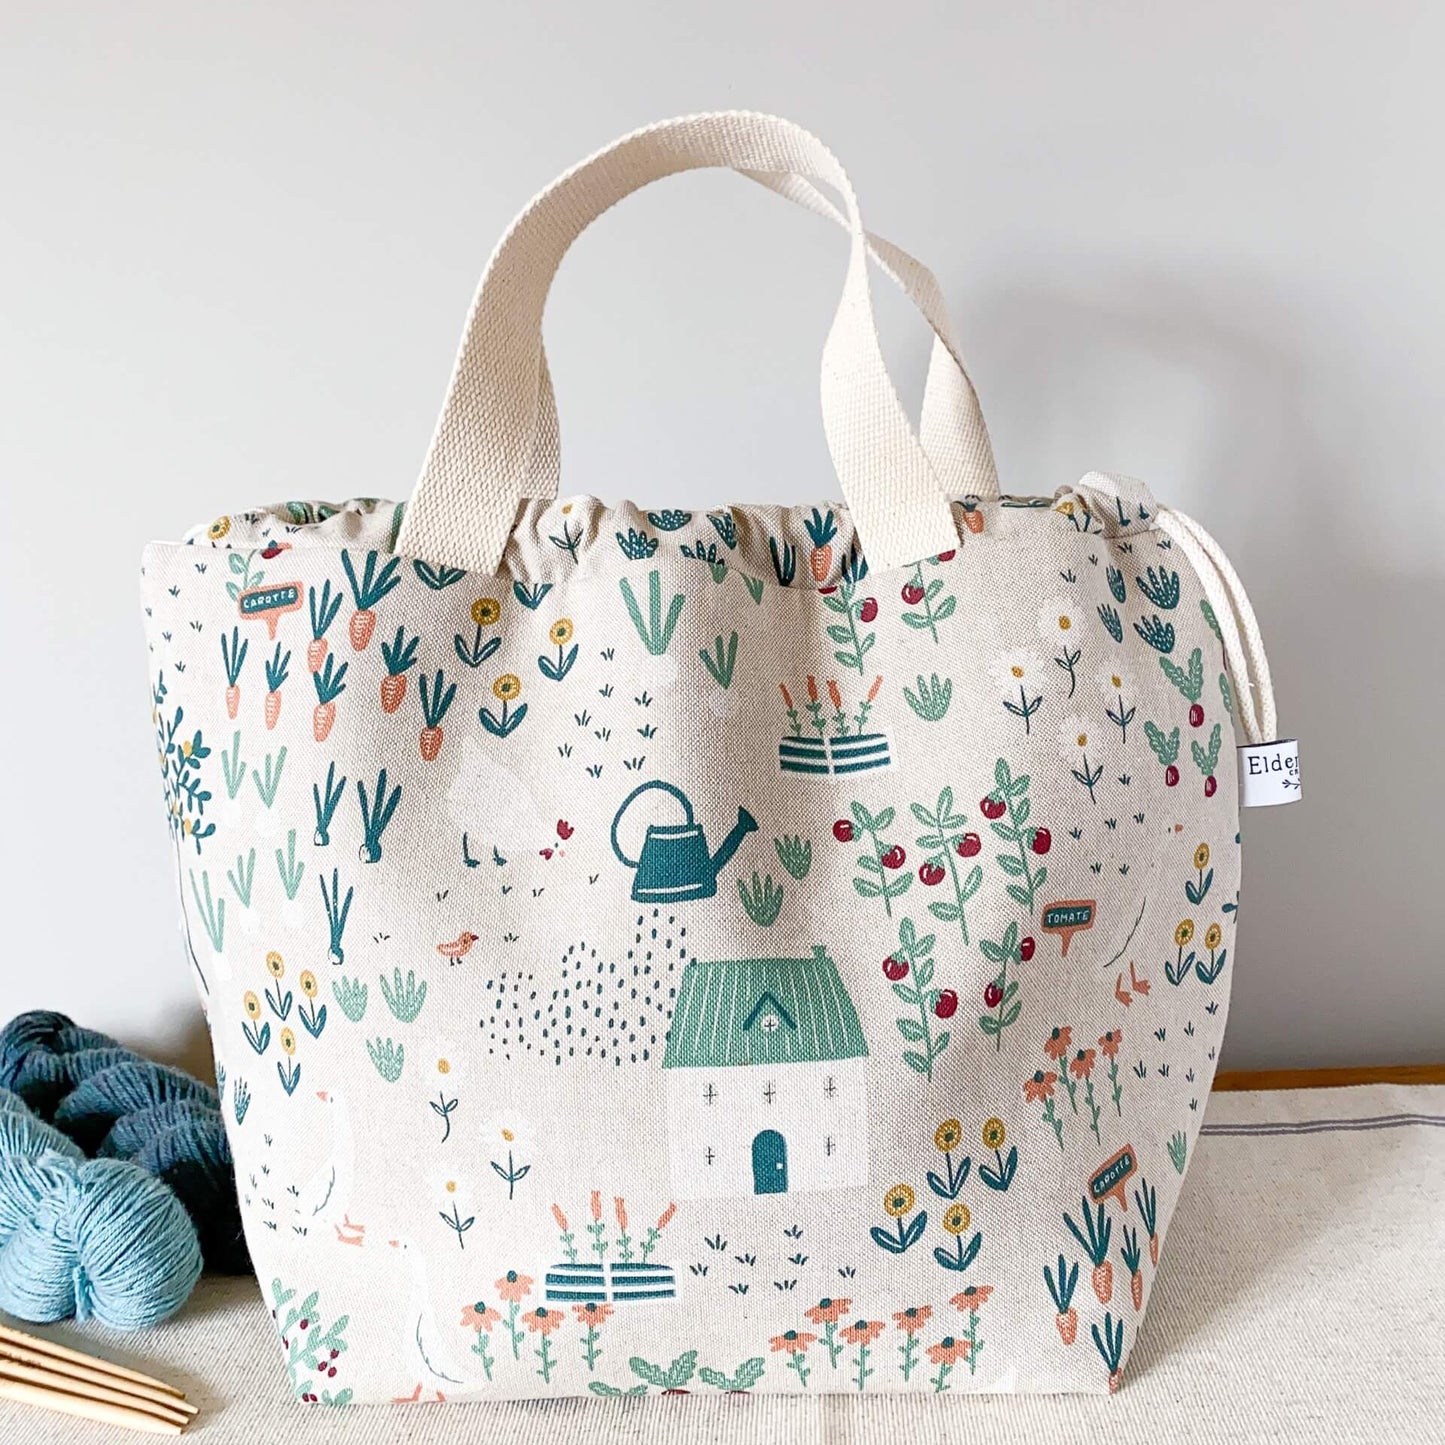 A large knitting project bag sits on a table next to some yarn. The bag is made from cottage garden themed fabric. 